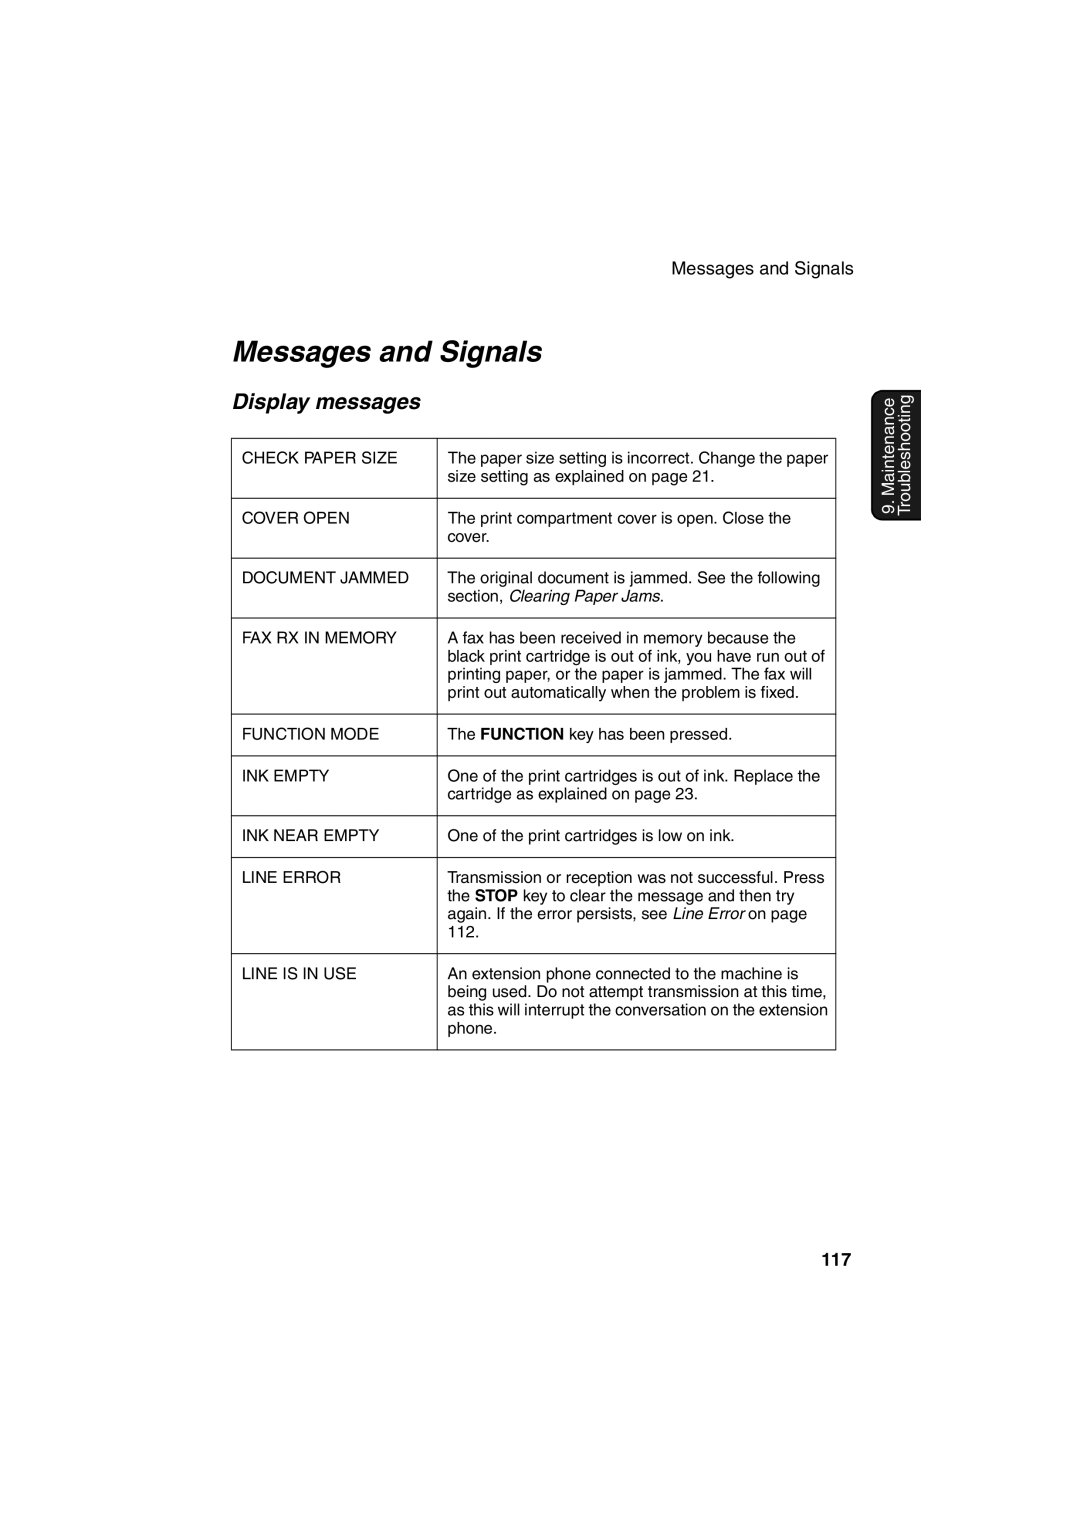 Sharp AJ-5030 operation manual Messages and Signals, Display messages 